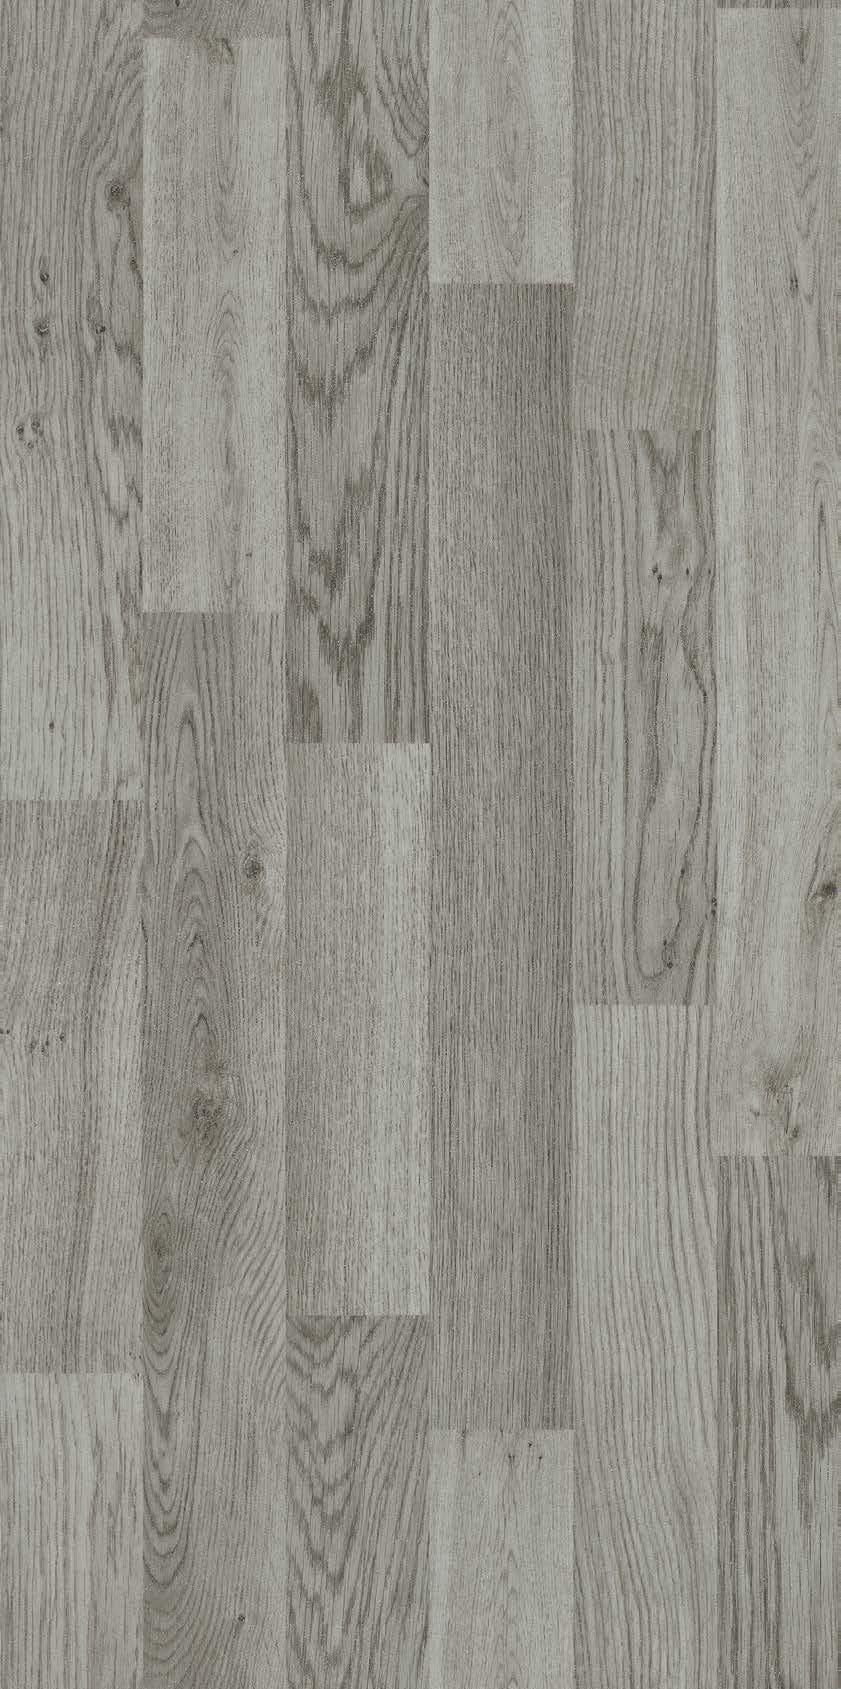 accentuated grain structure, this bold statement floor is popular in